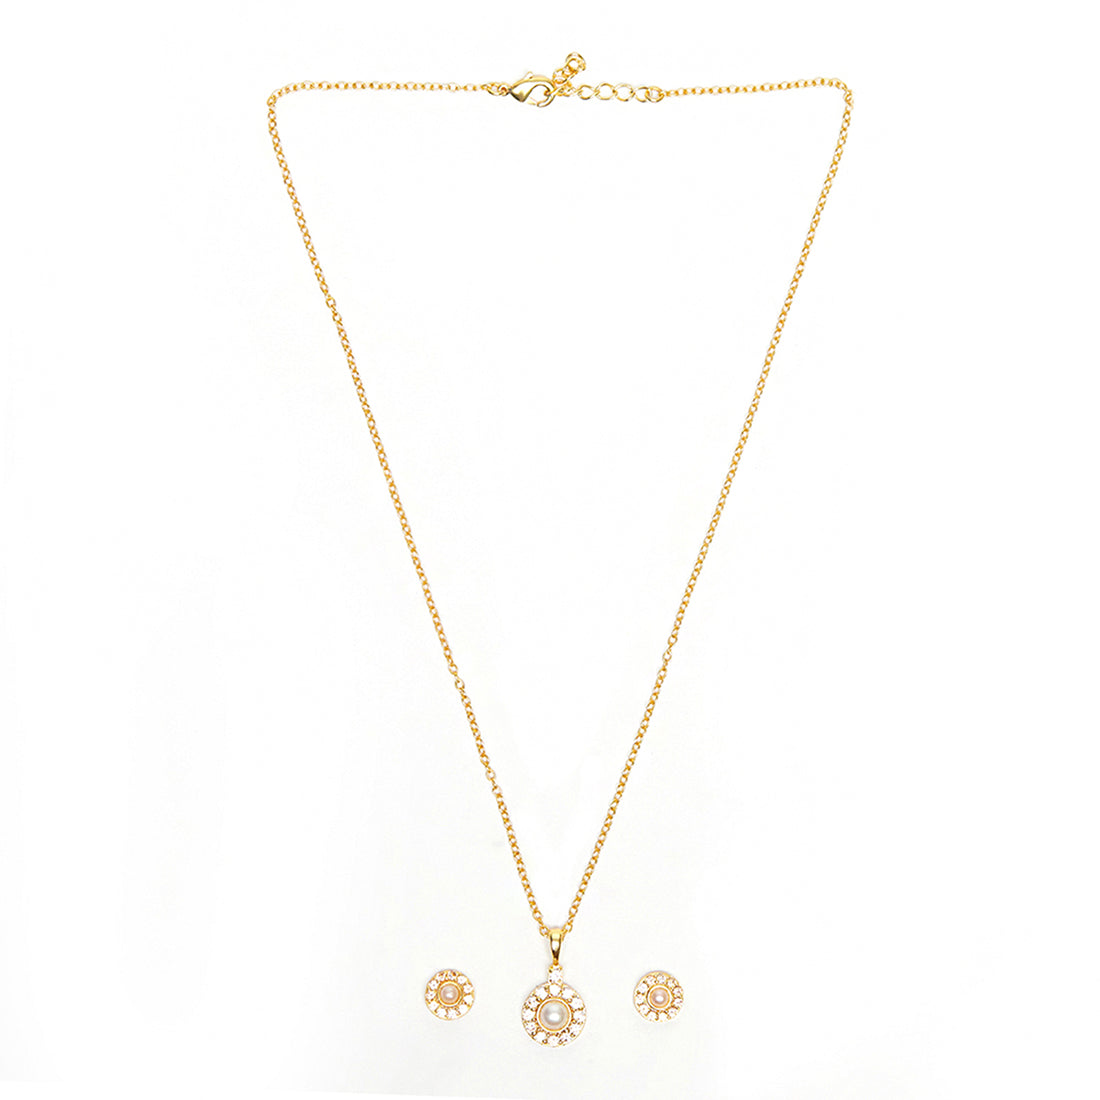 Gold Toned Necklace Set Embellished With Pearl Beads